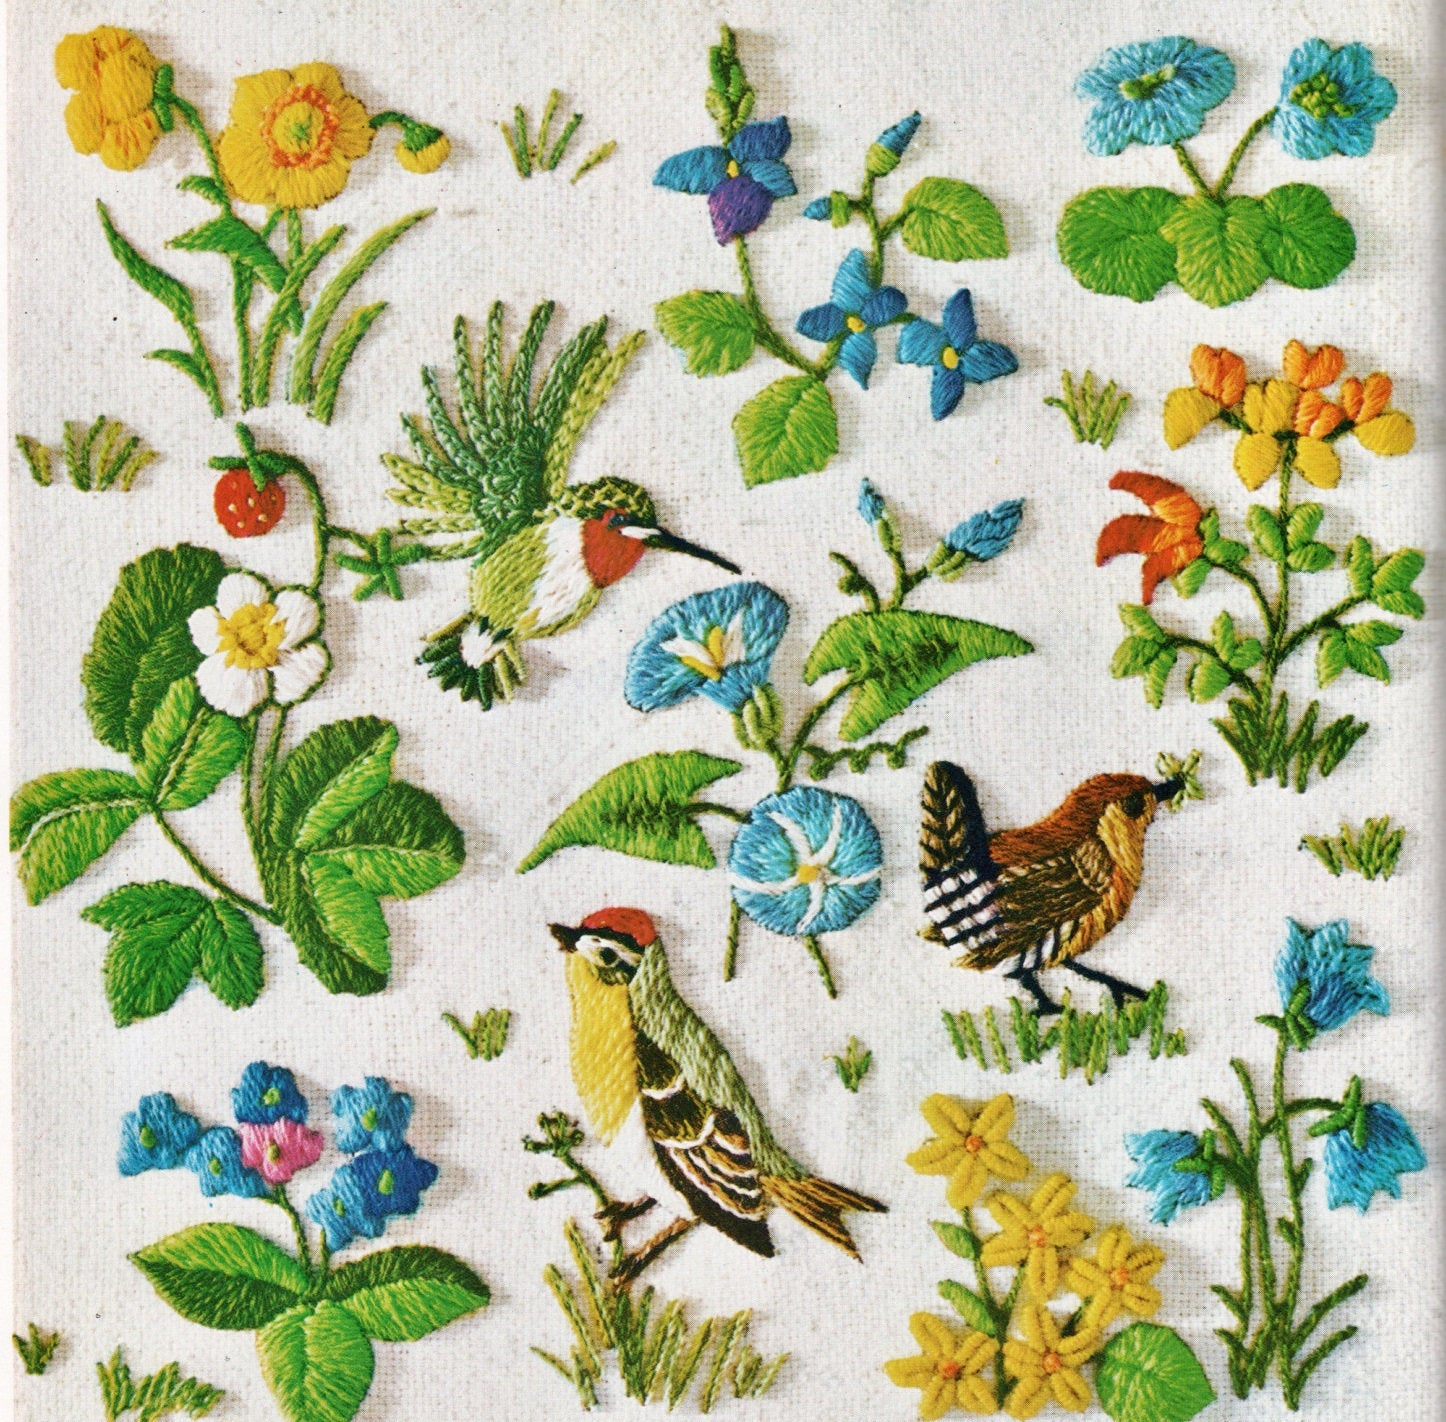 Crewel Embroidery Patterns Pdf Vintage Crewel Embroidery Patterns Spring Birds Berries Flower Blossoms Needlepoint Stitchery Motifs Instant Digital Download